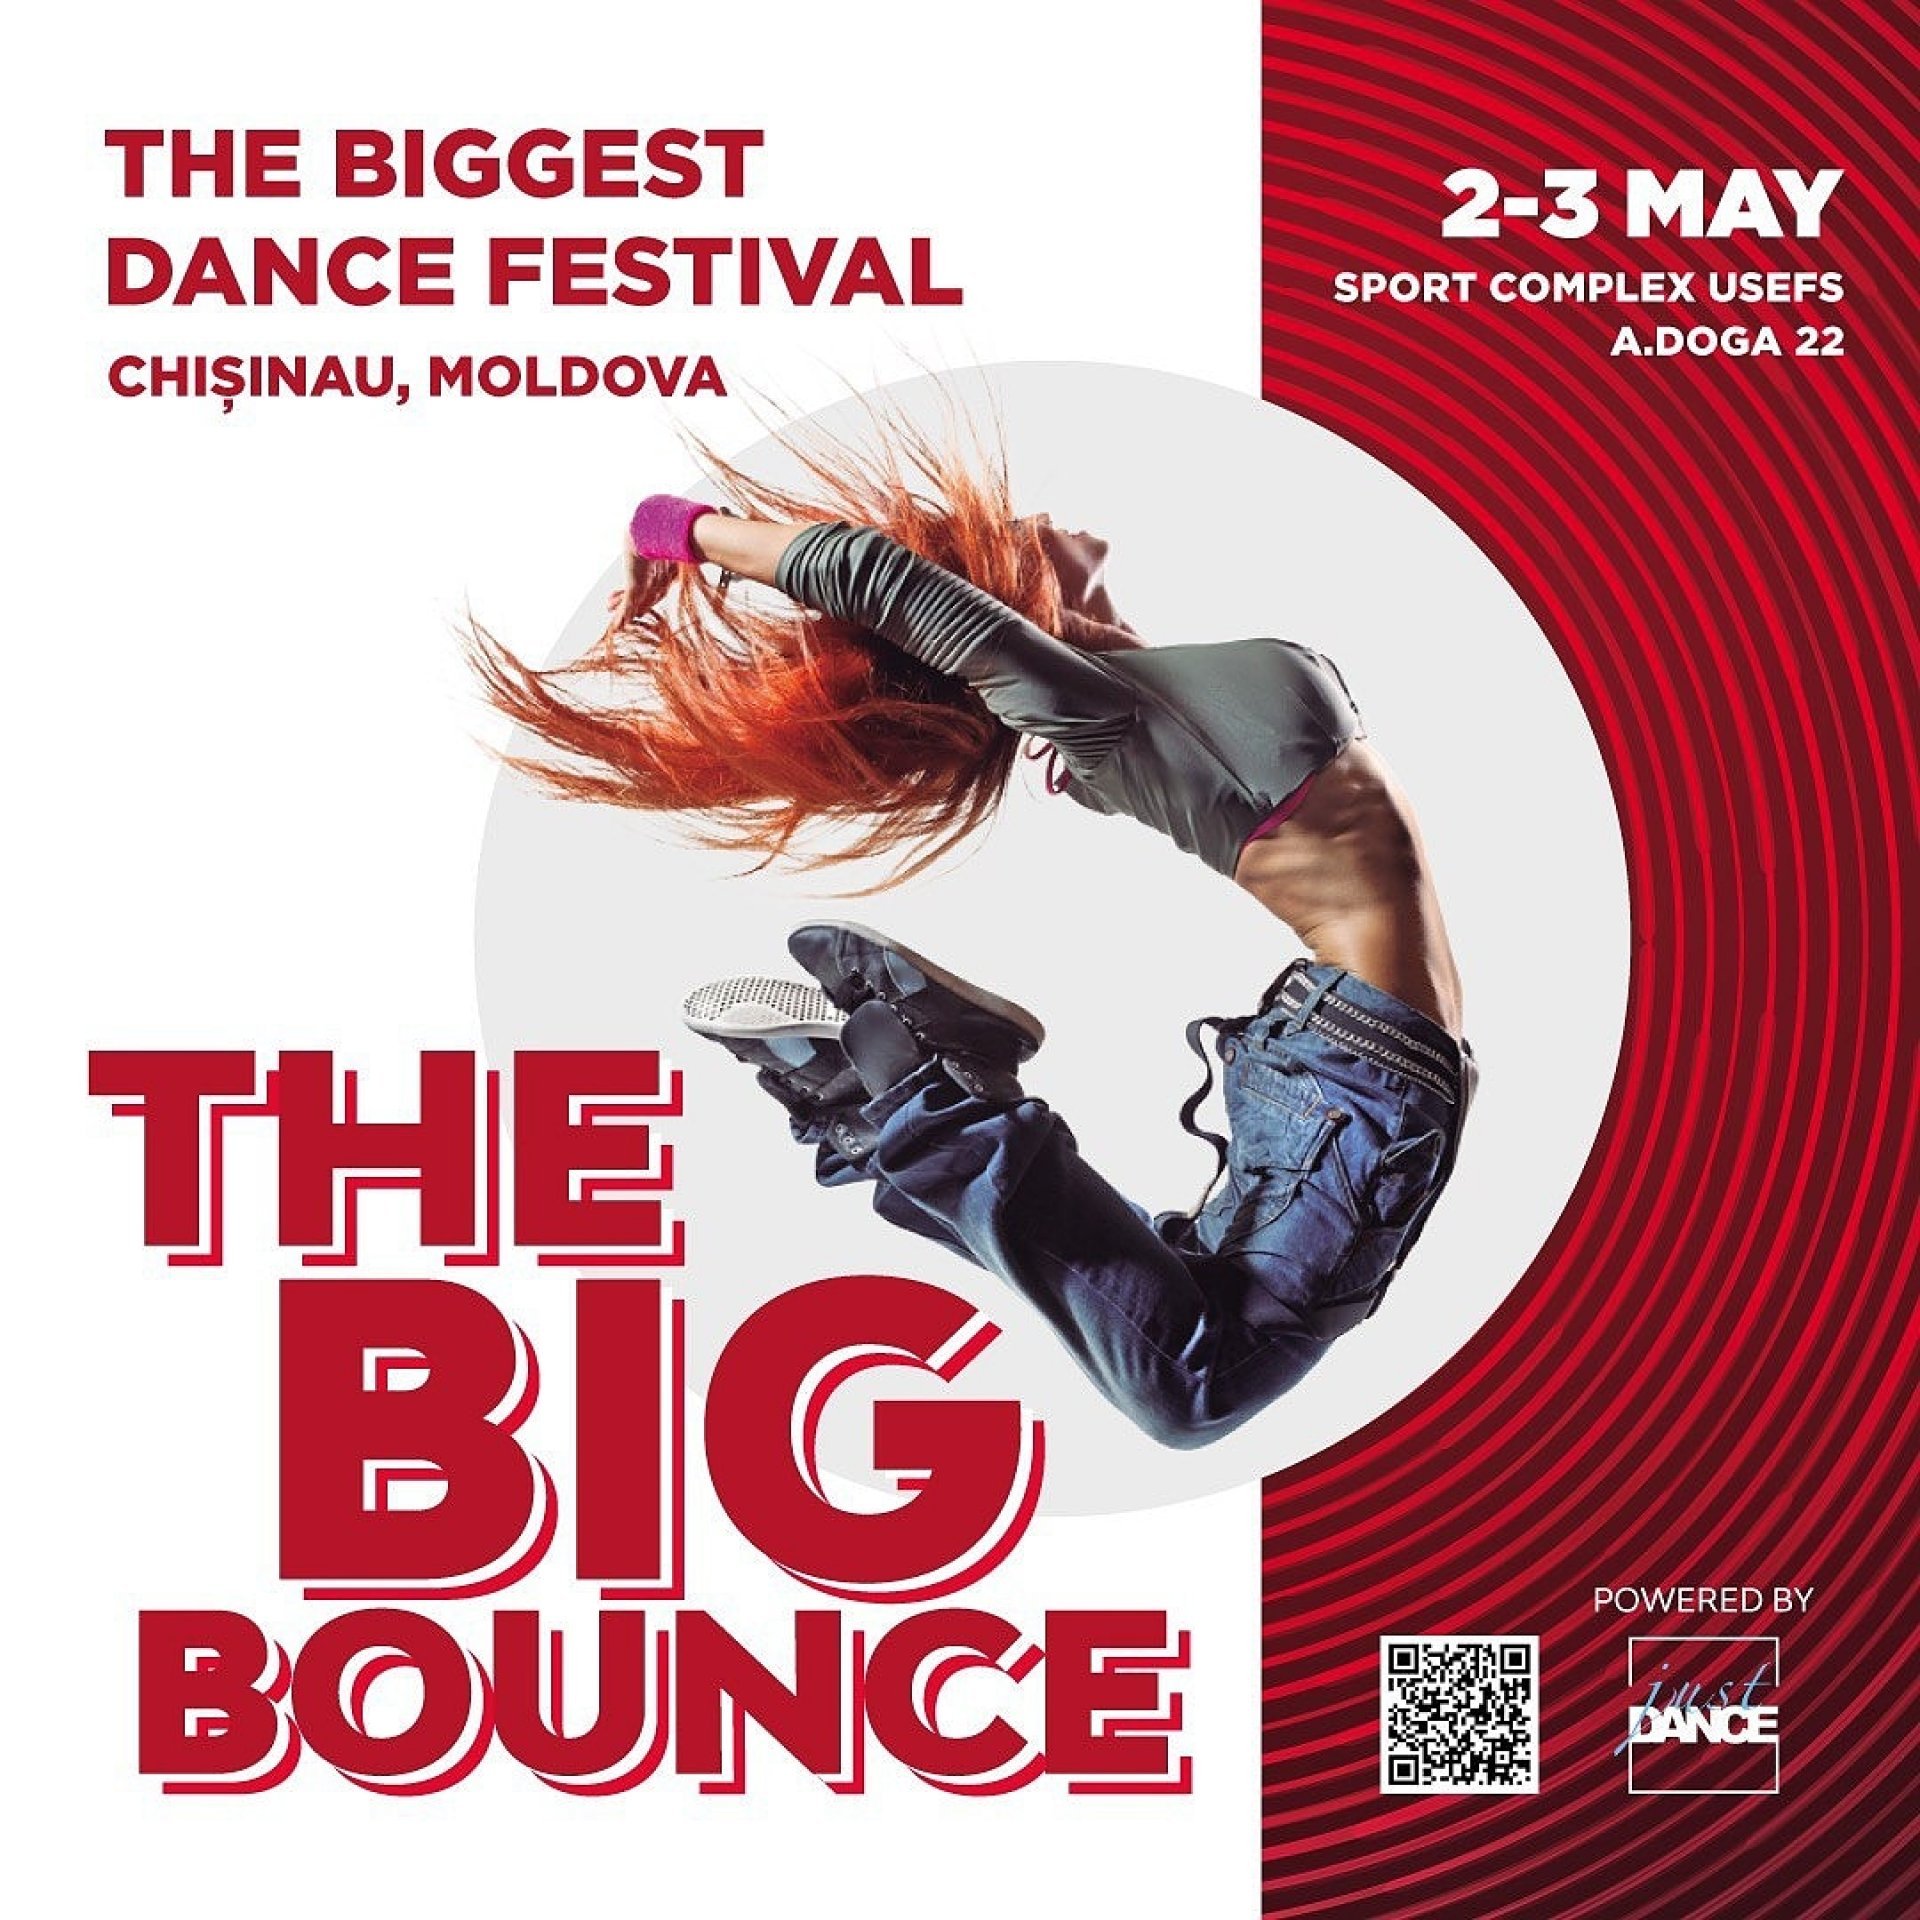 The Big Bounce Dance Event 